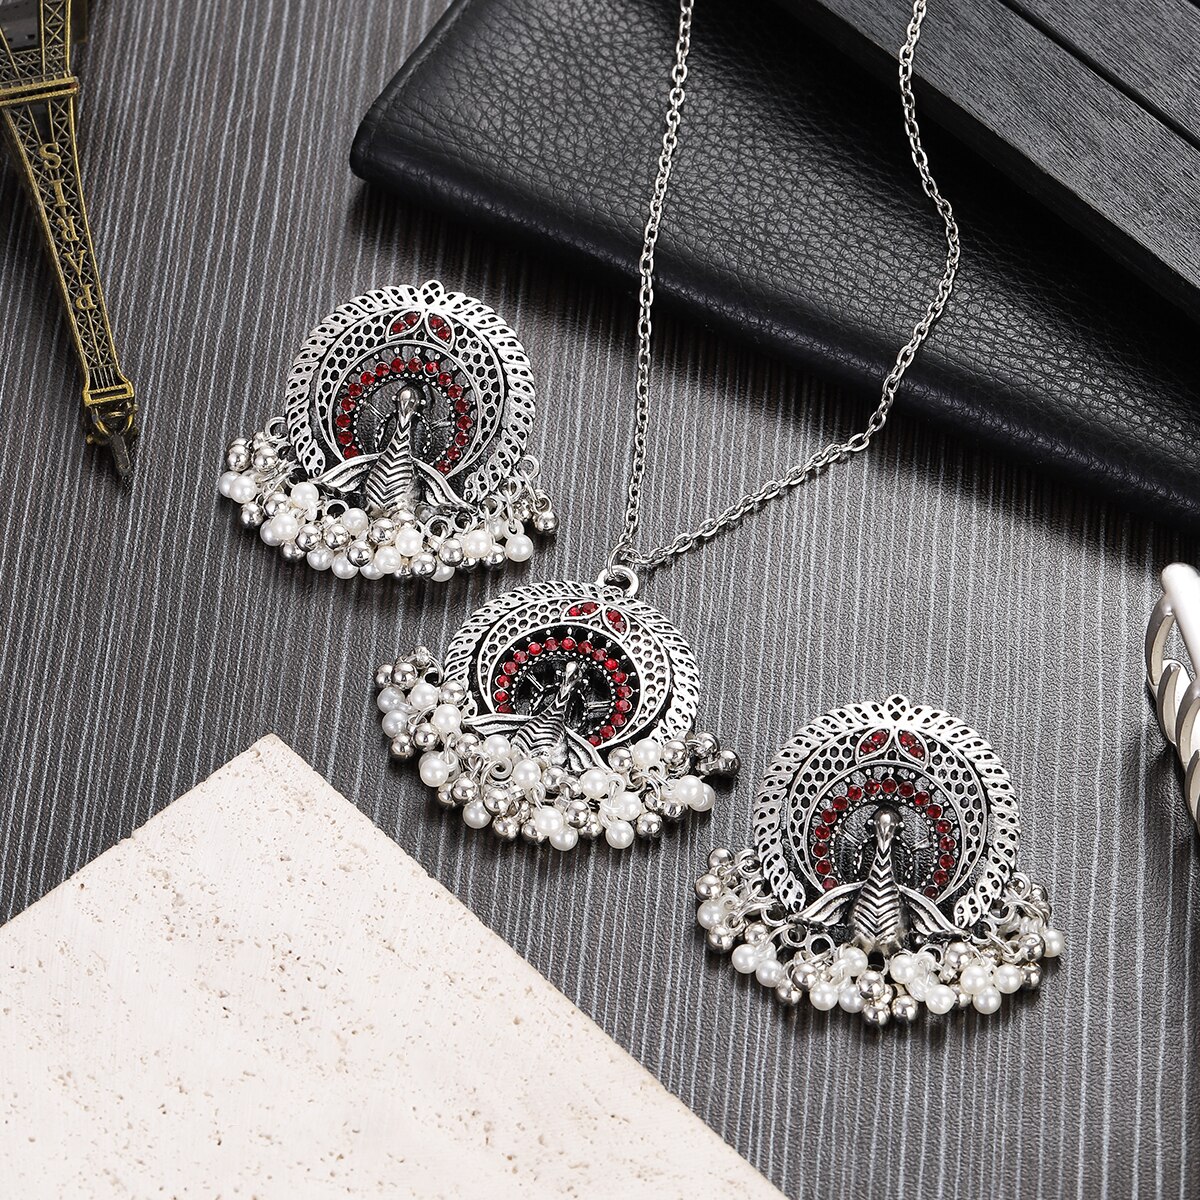 Vintage-Silver-Color-Jewelry-Sets-for-Women-Accessories-Ethnic-Geometric-Peacock-Crystal-Pendant-Nec-1005004941302824-7